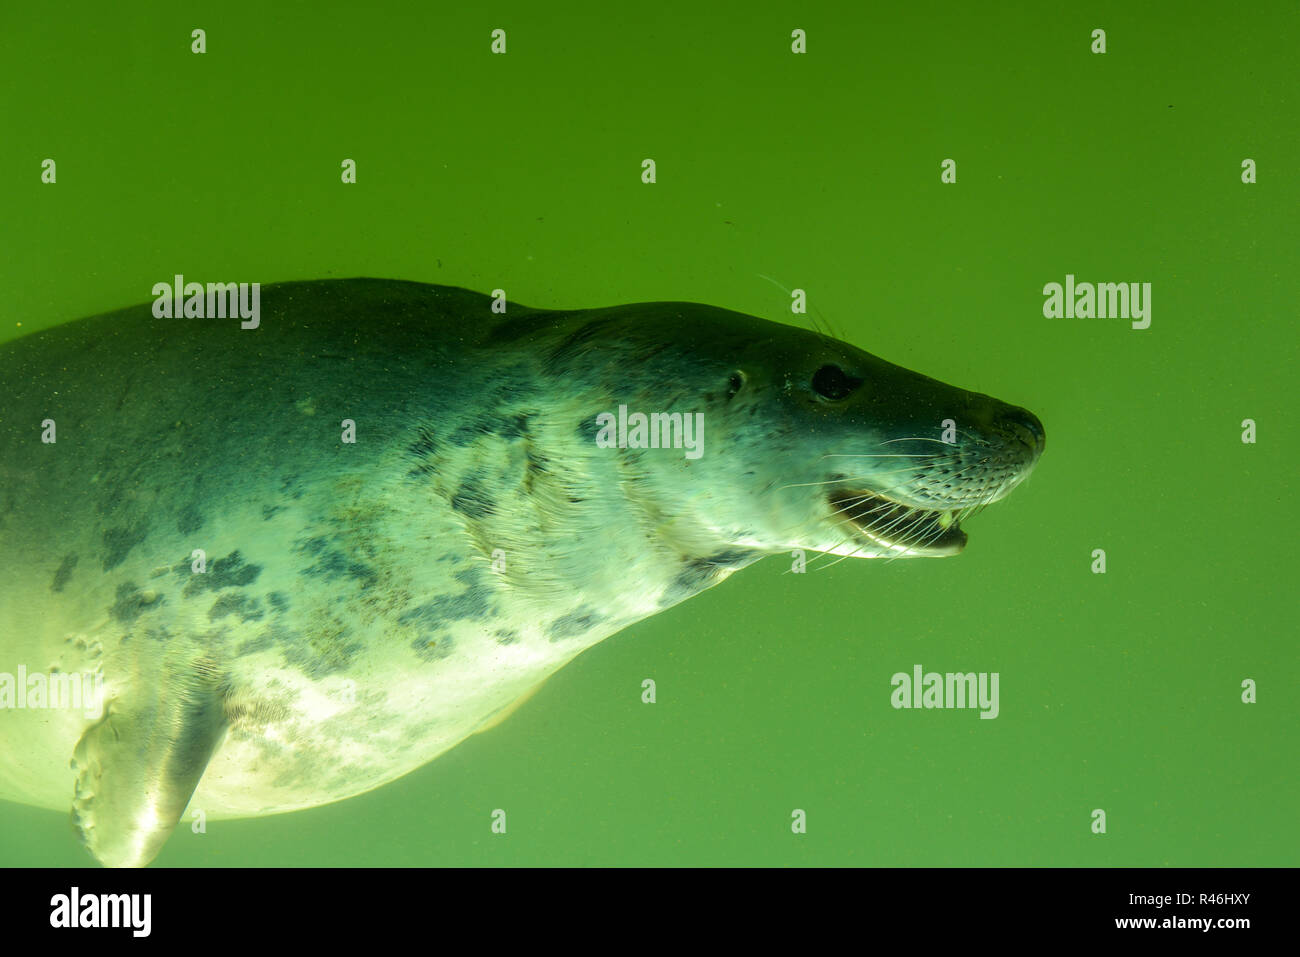 View through the underwater window of a swimming seal in green water as tourist attraction Stock Photo